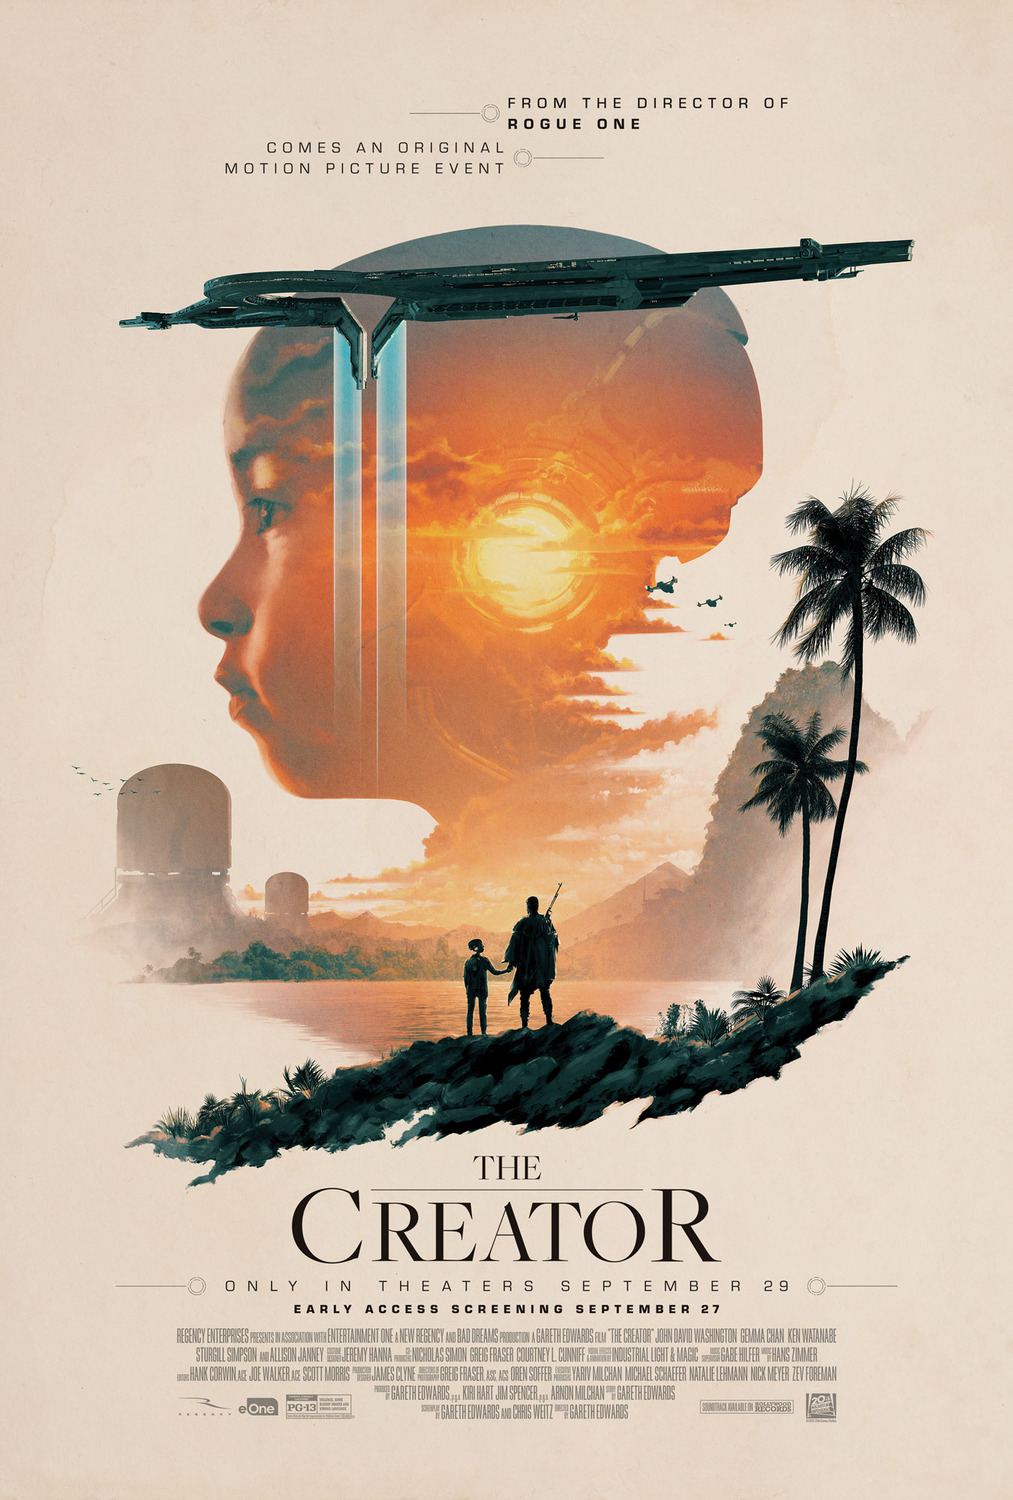 A paint-brush aesthetic image with the robot child Alphie's head doubling as the setting sun, with the silhouette of the film's leads (Alphie and Joshua) in the foreground.